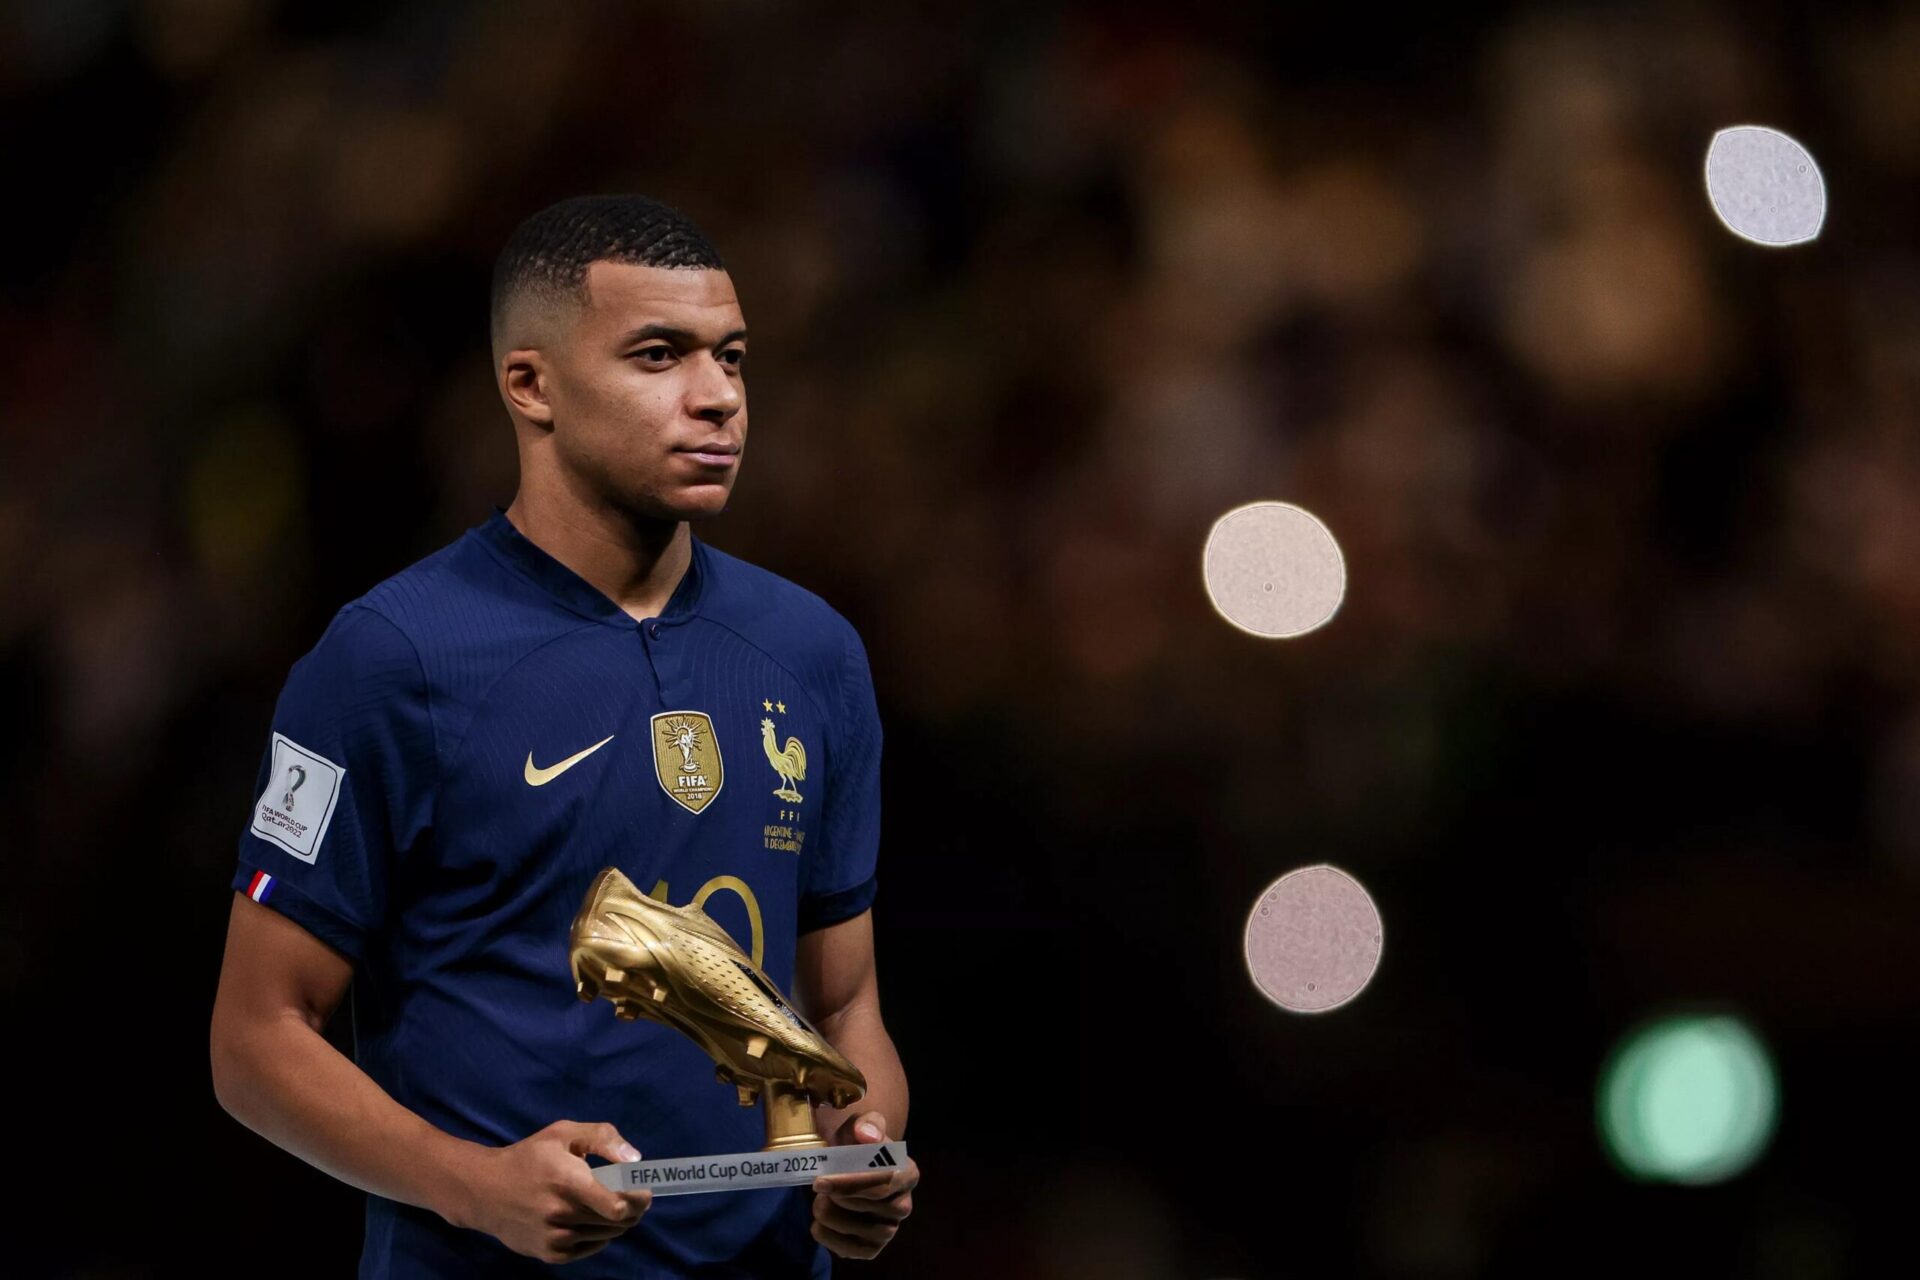 A new 1 billion bid from Real Madrid will be made for Mbappe.